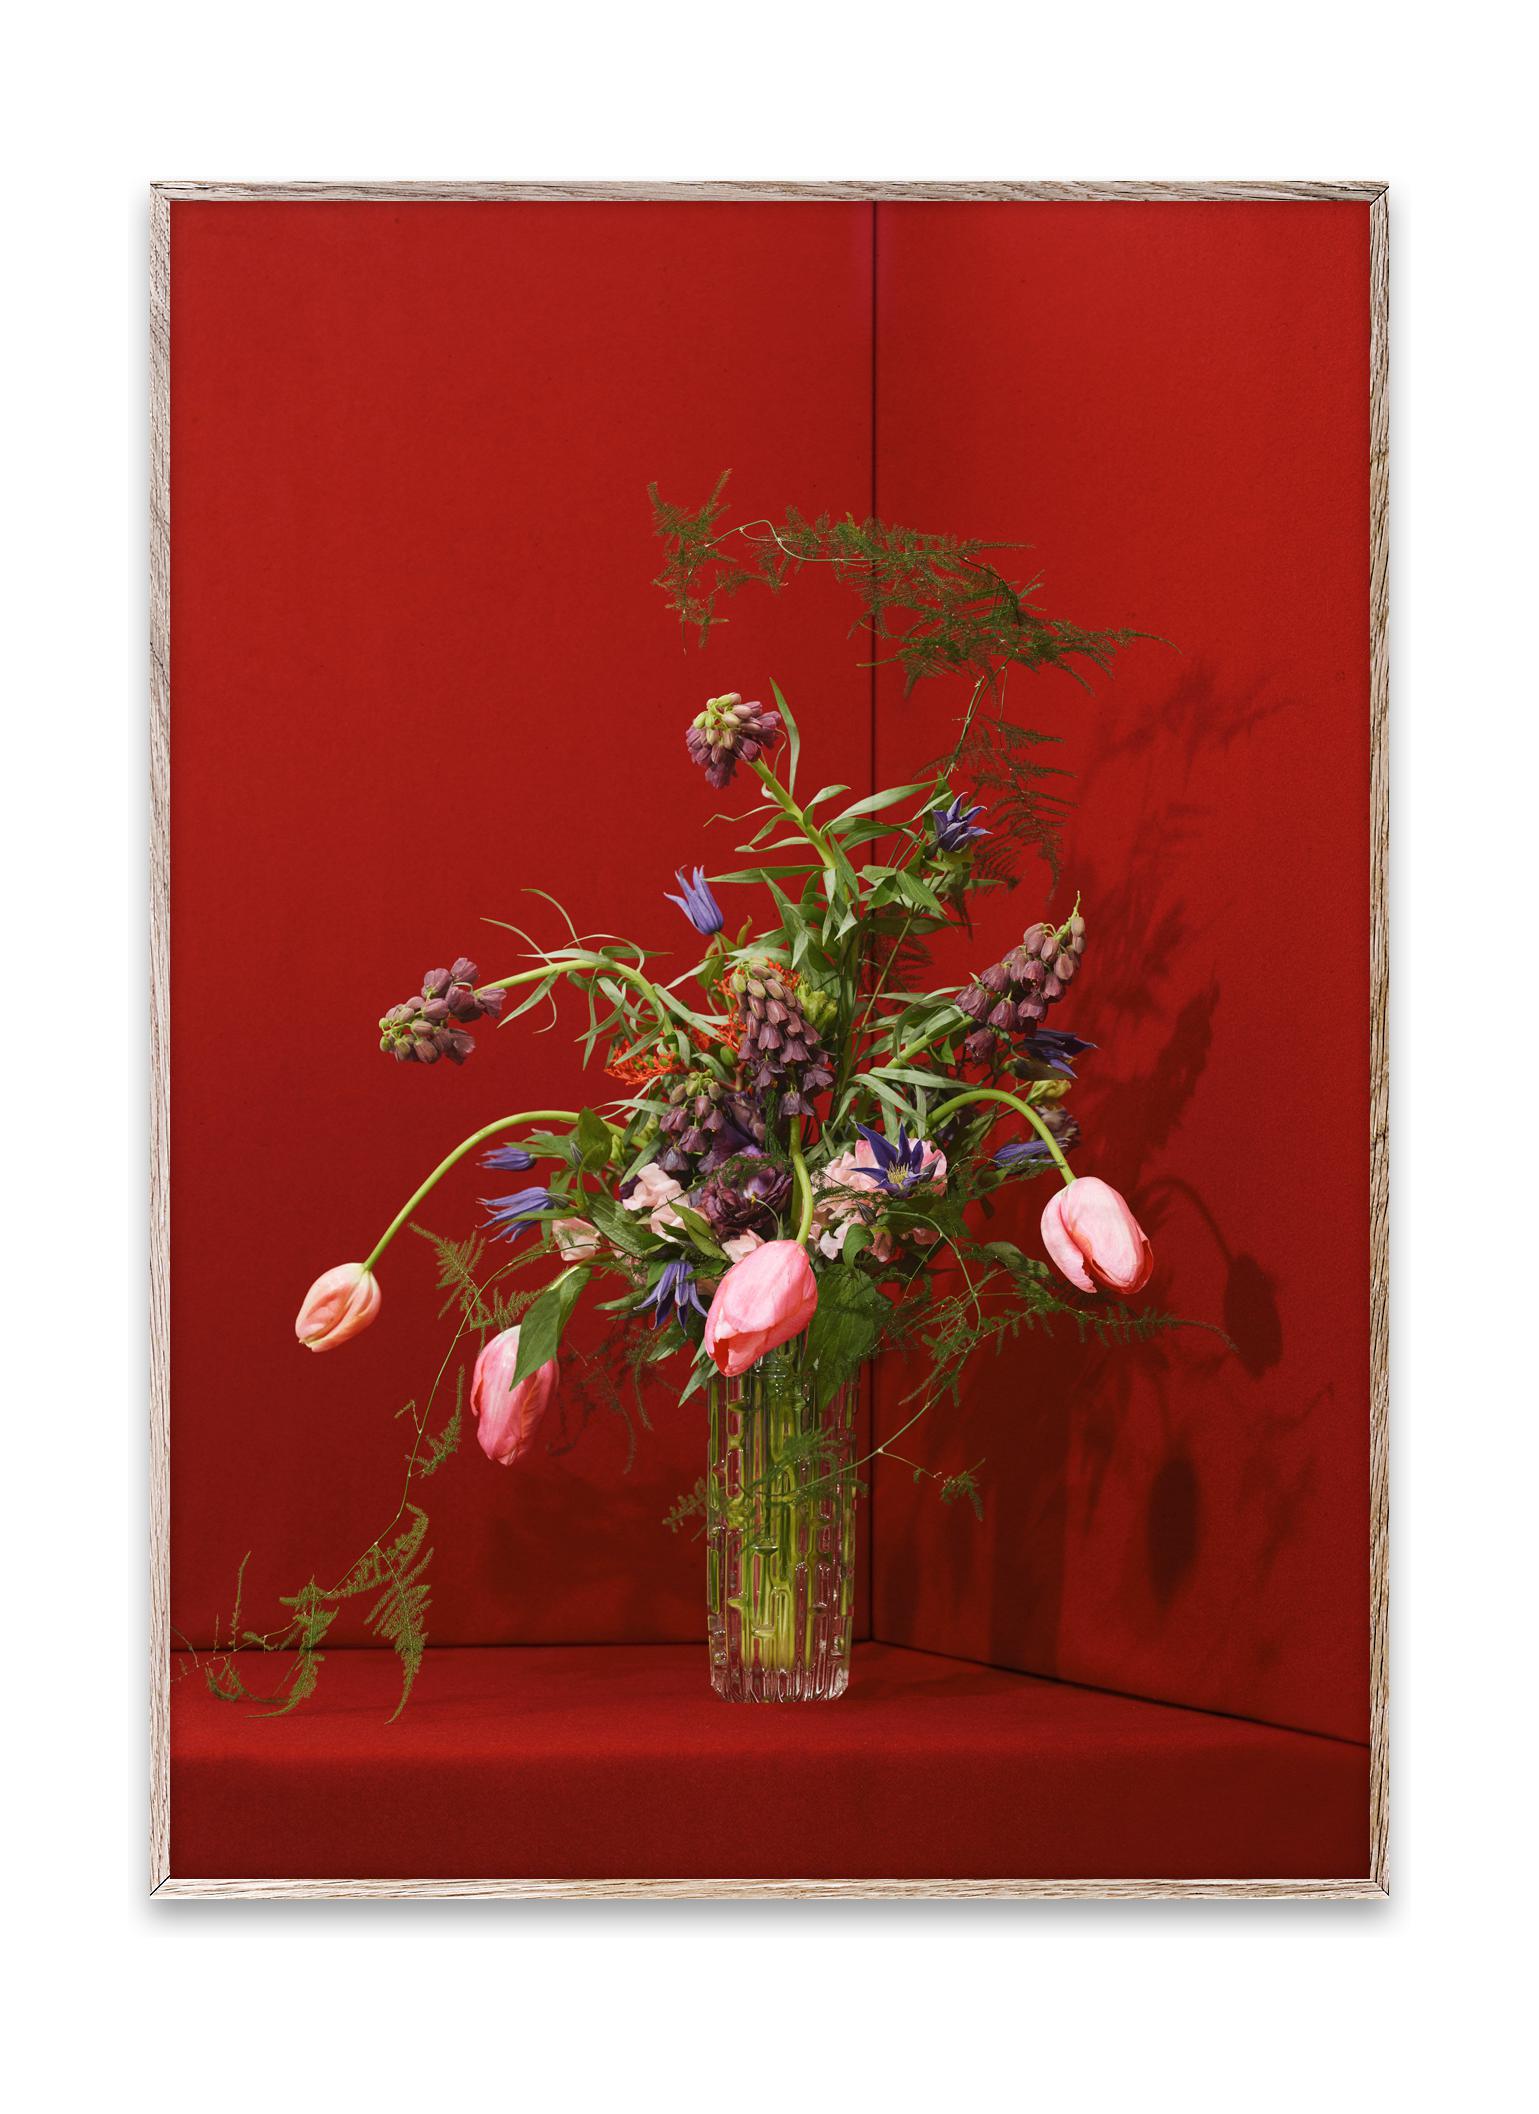 Paper Collective Blomst 03 Poster 30x40 Cm, Red